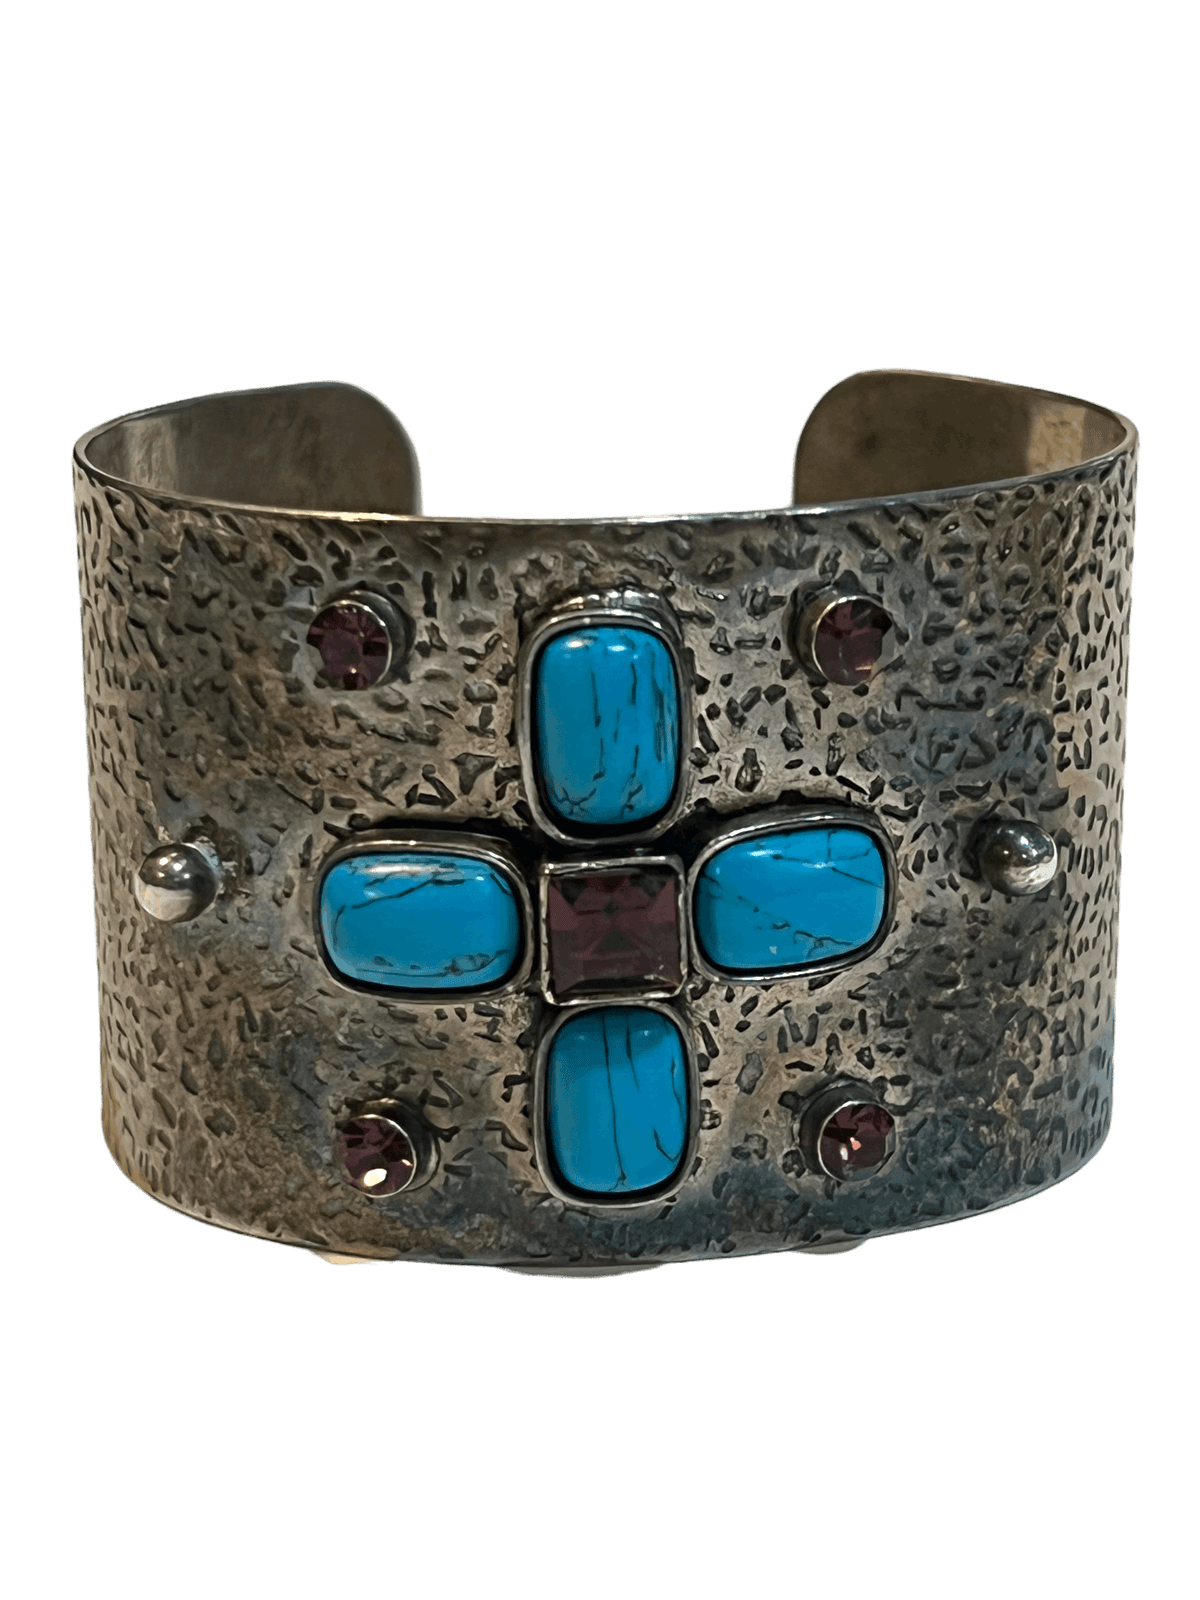 Jewel Symphony: Amethyst and Turquoise Encrusted Silver Cuff Bracelet